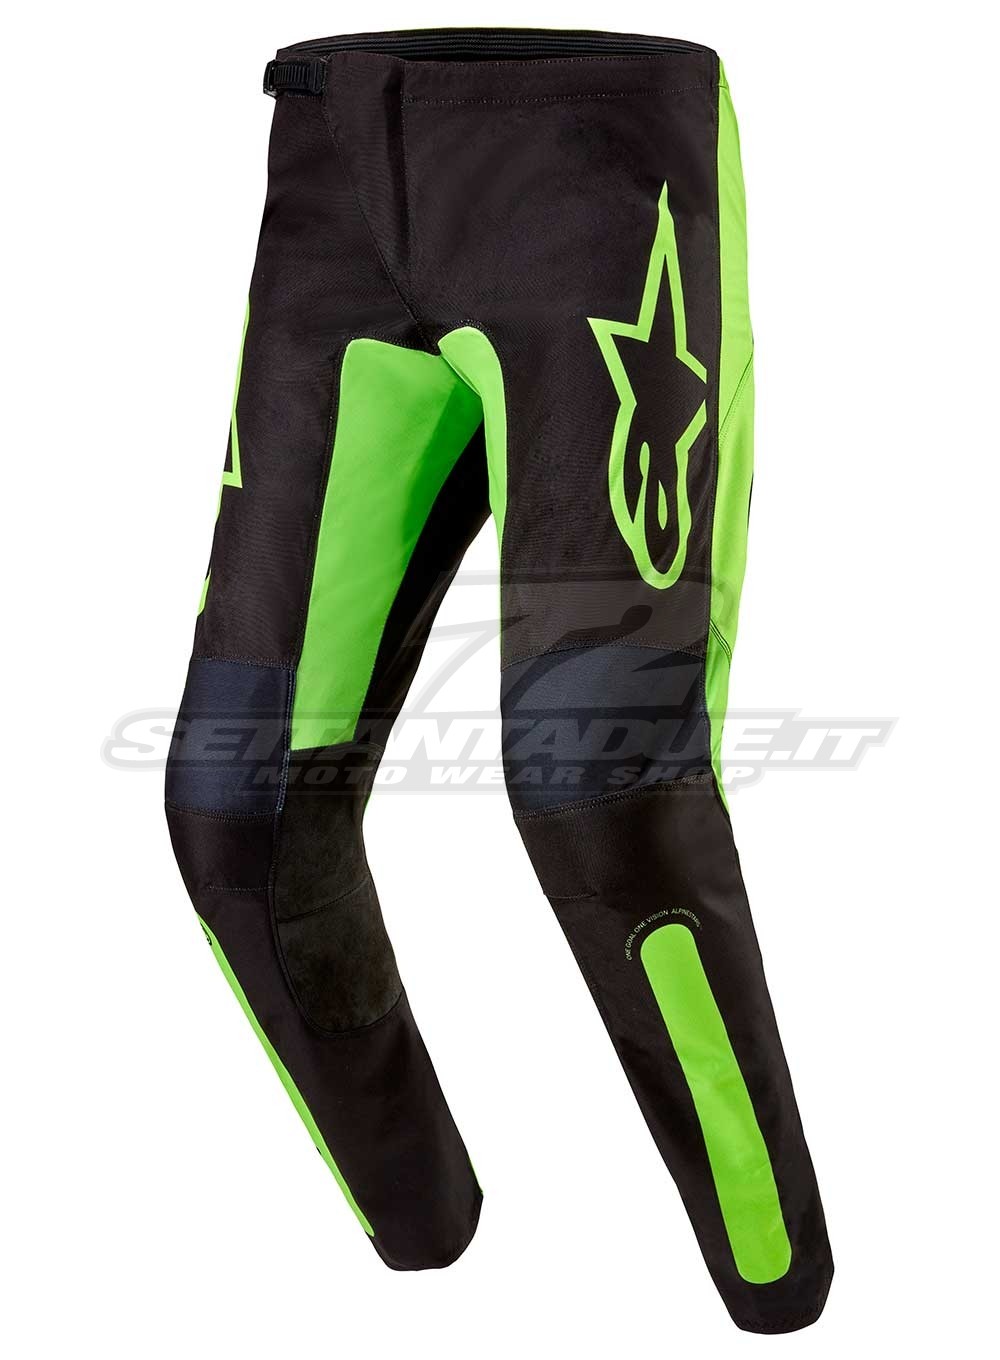 Fox Europe - Fox Fox (SALE) Jersey/Pant Bundle - 180 - LE RETRO PRO CIRCUIT  - Clothing from Off Road World UK